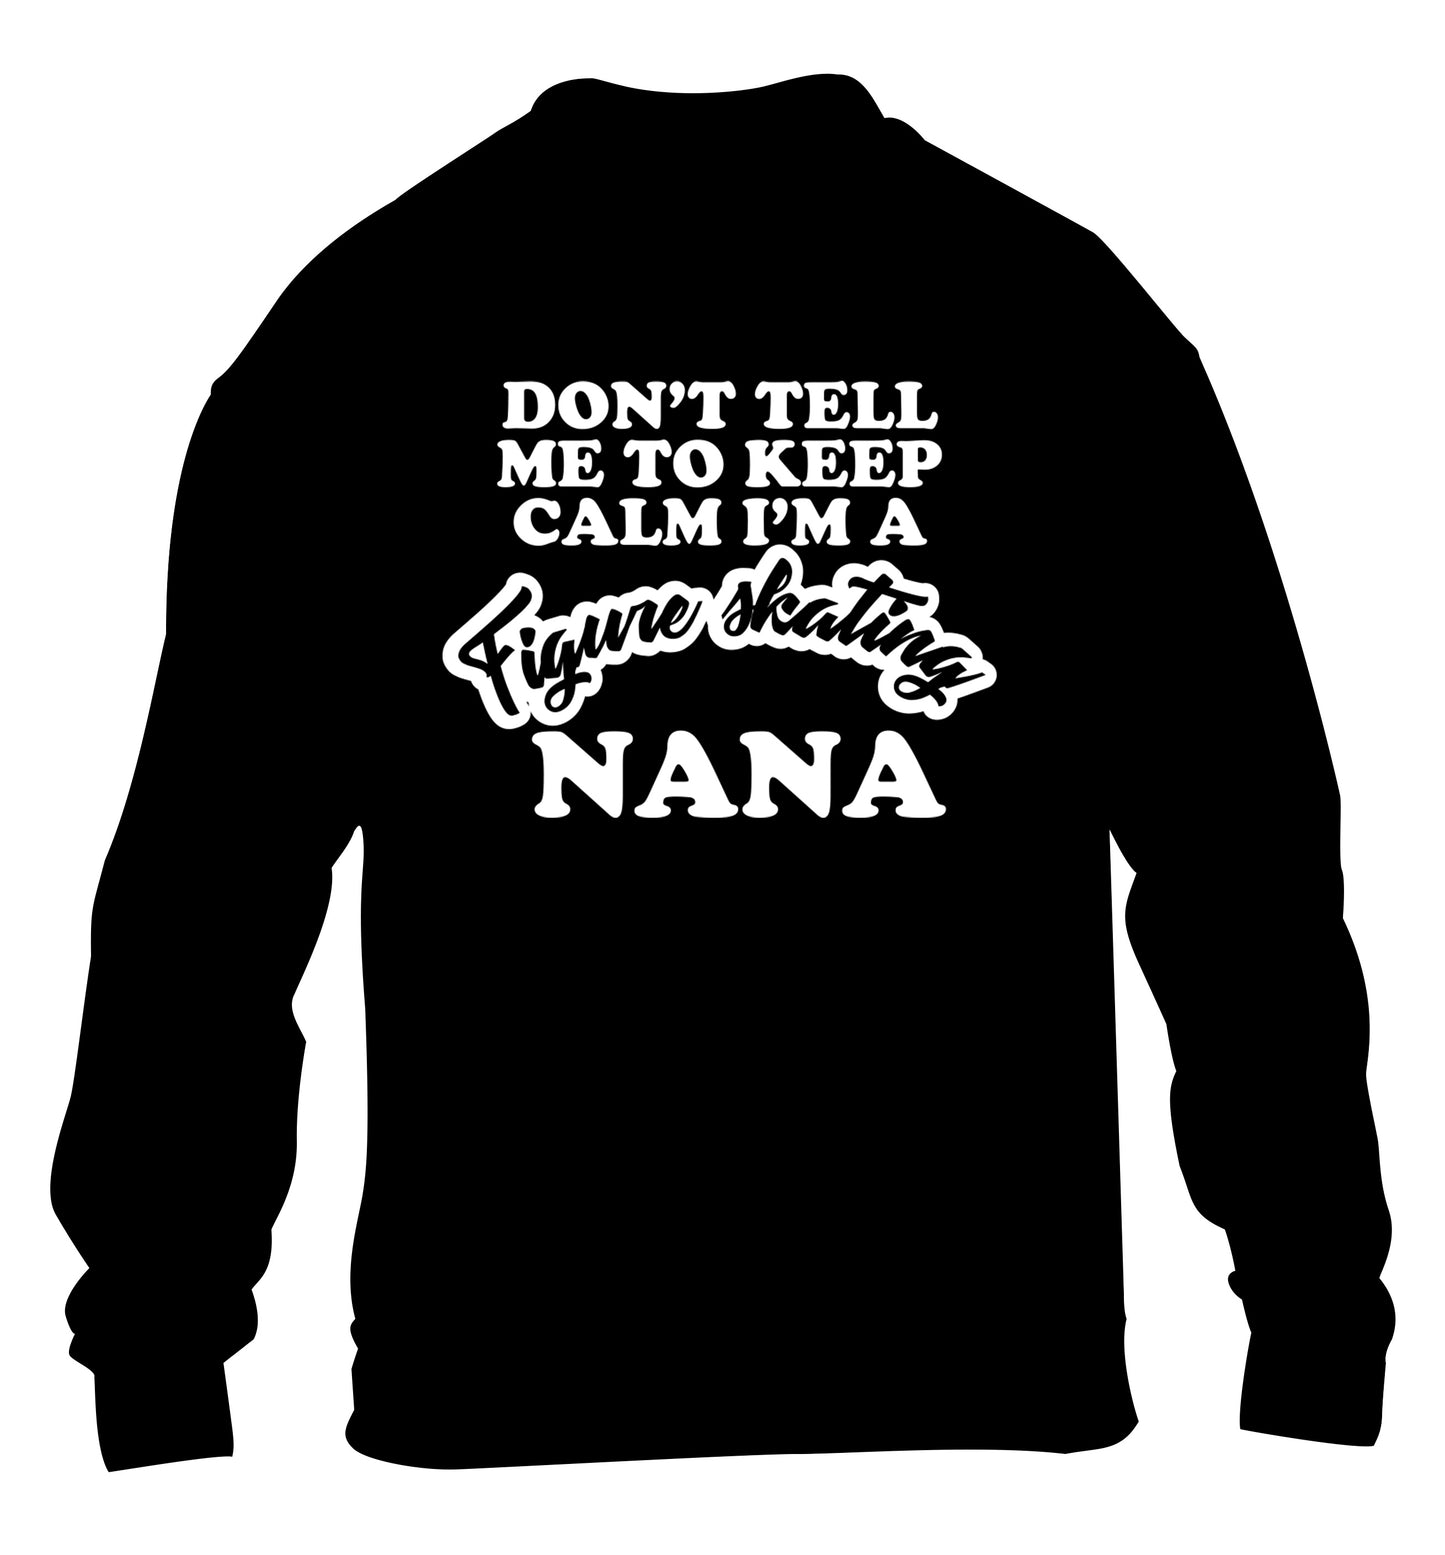 Don't tell me to keep calm I'm a figure skating nana children's black sweater 12-14 Years